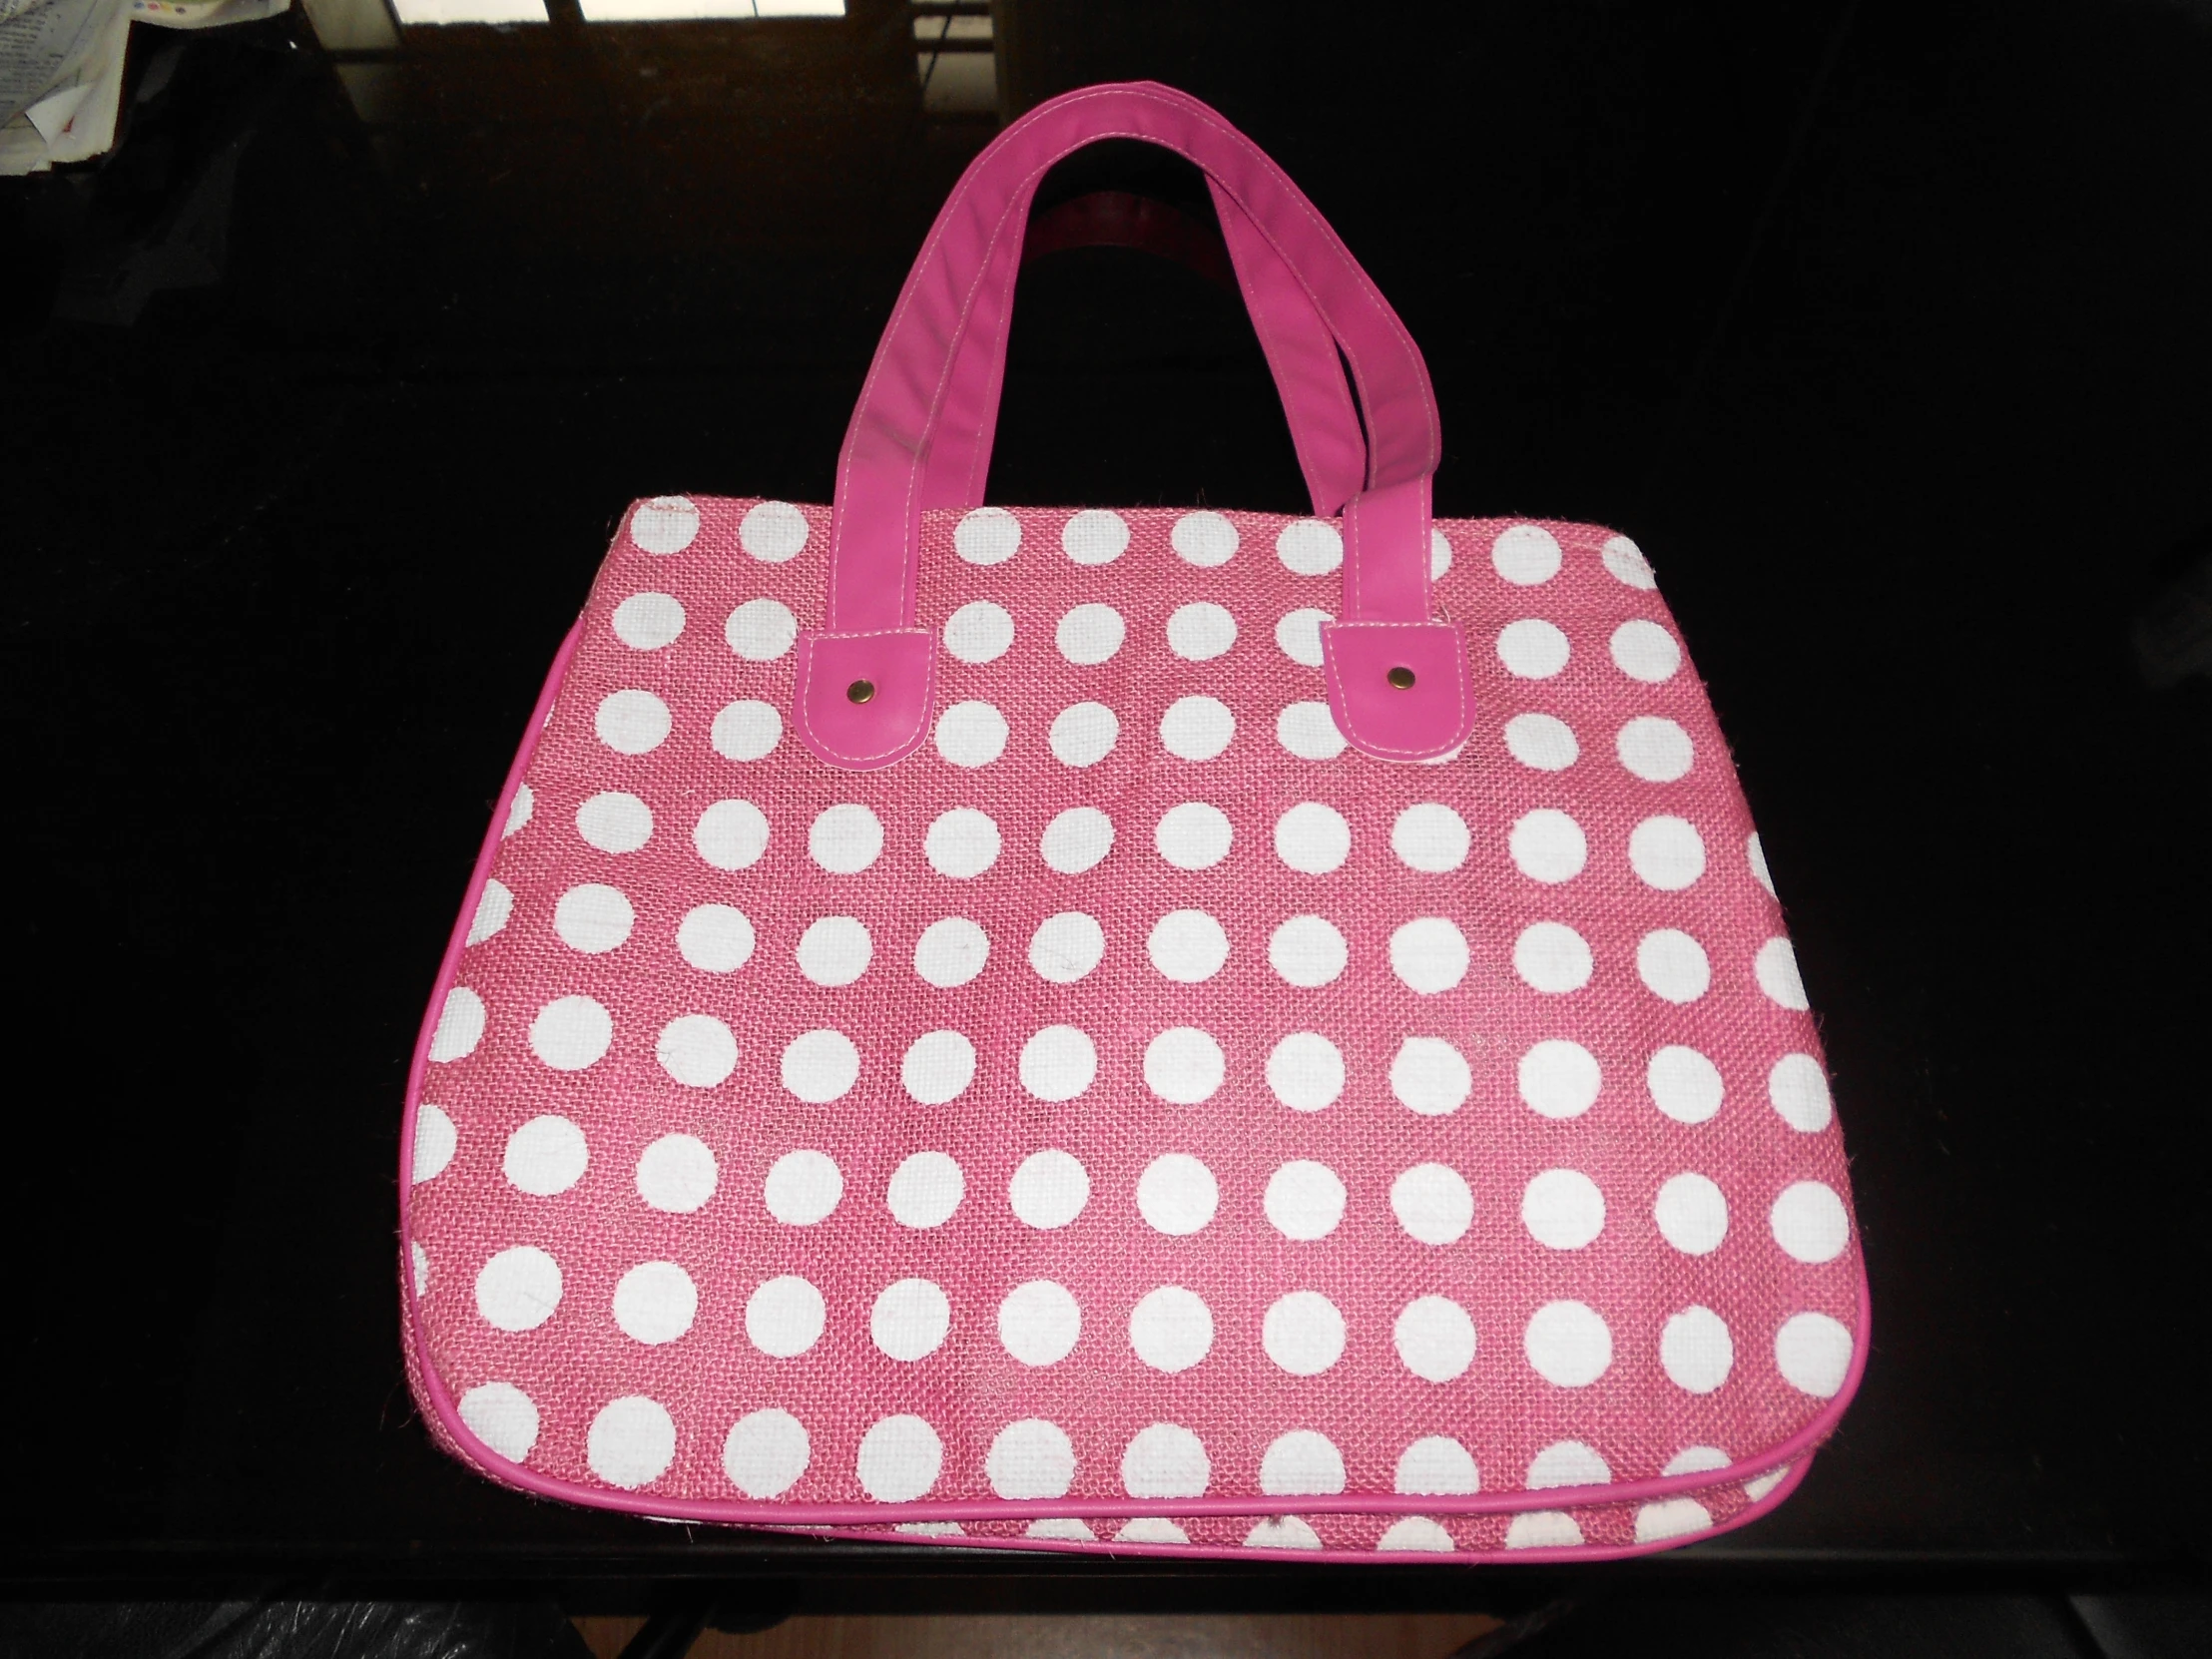 a bag with white polka dots sitting on a table